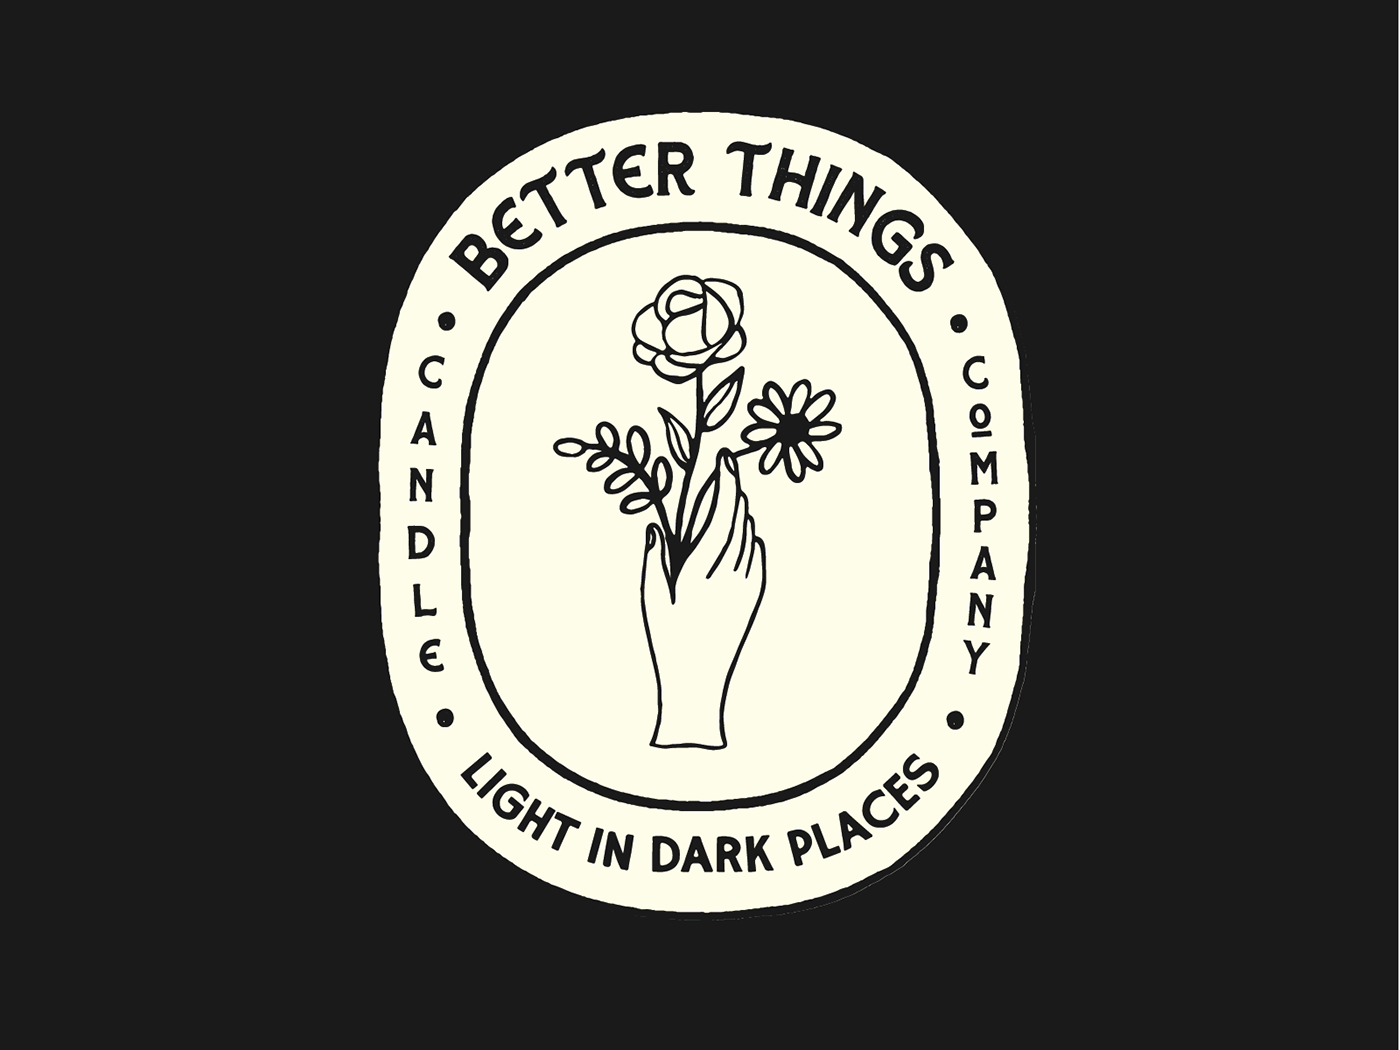 Branding logo badge design for Better Things Candle Company